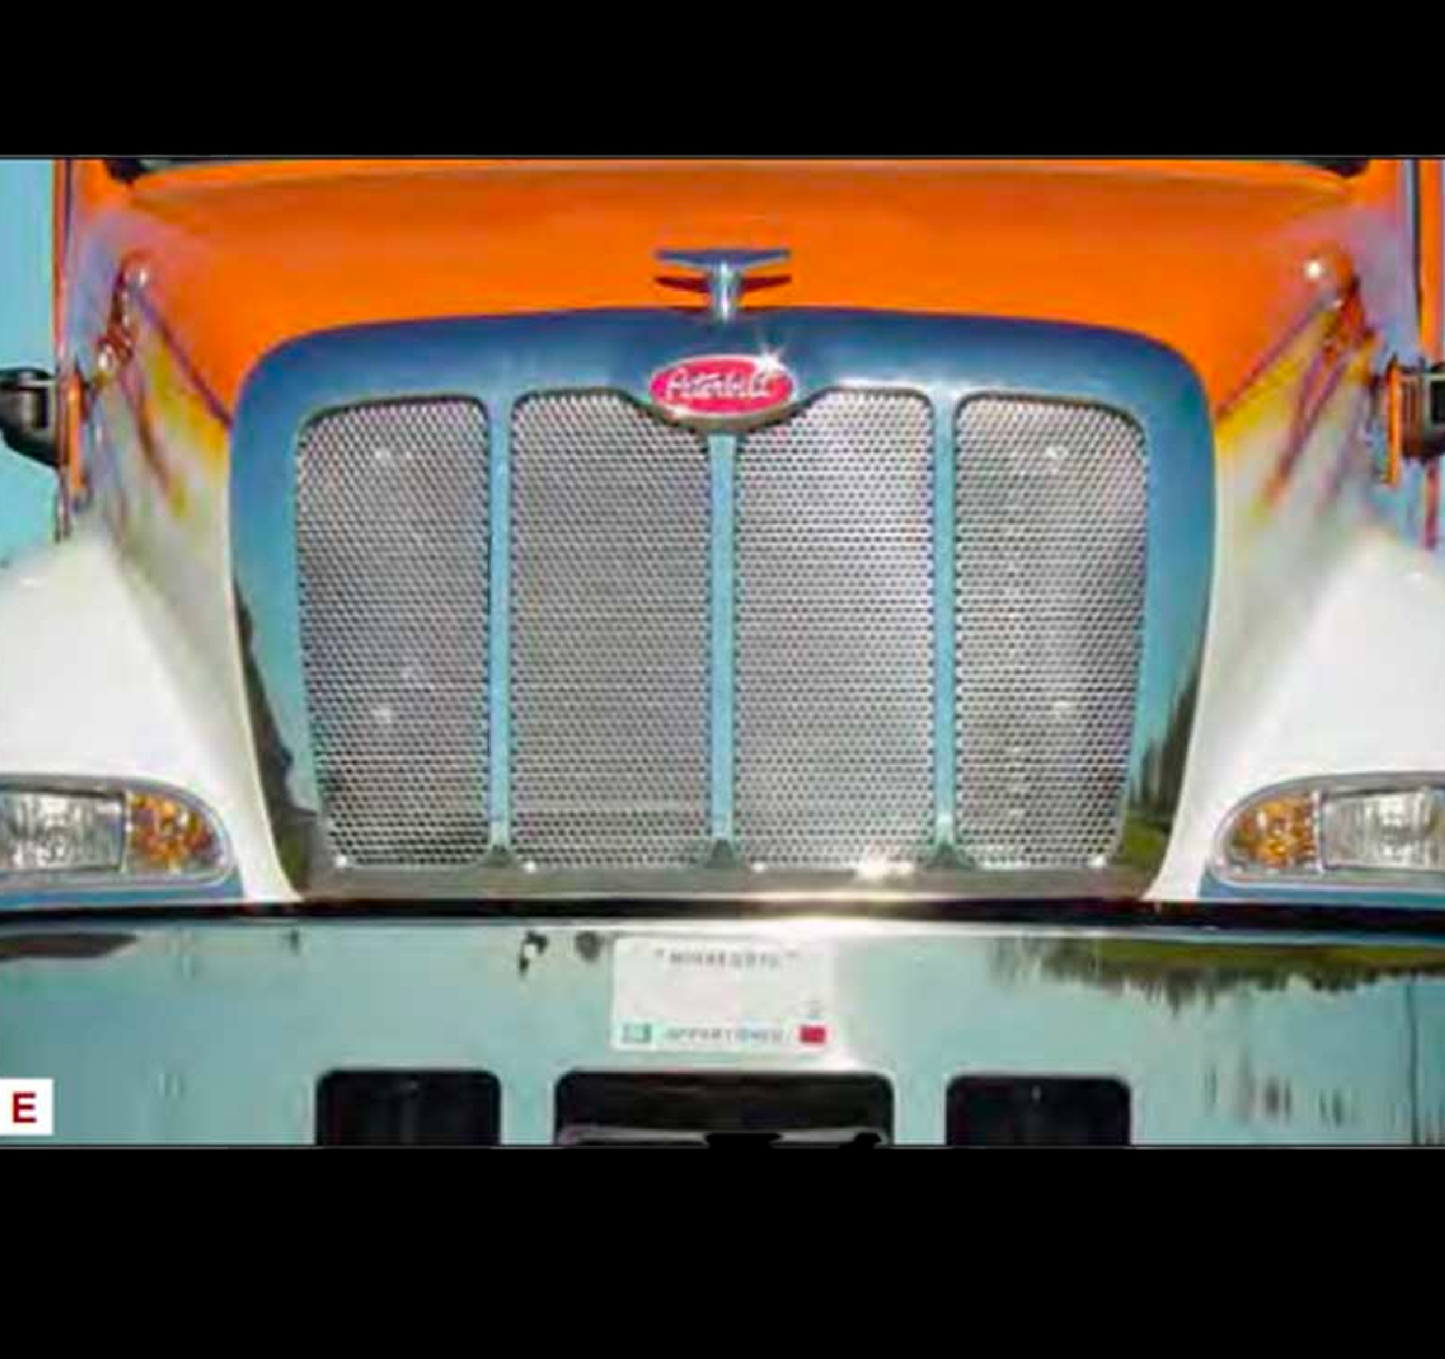 Grille fits Peterbilt 387 Punched Grill 1/4” Circle Holes (Insert Only - Does Not Include Grill Surround)